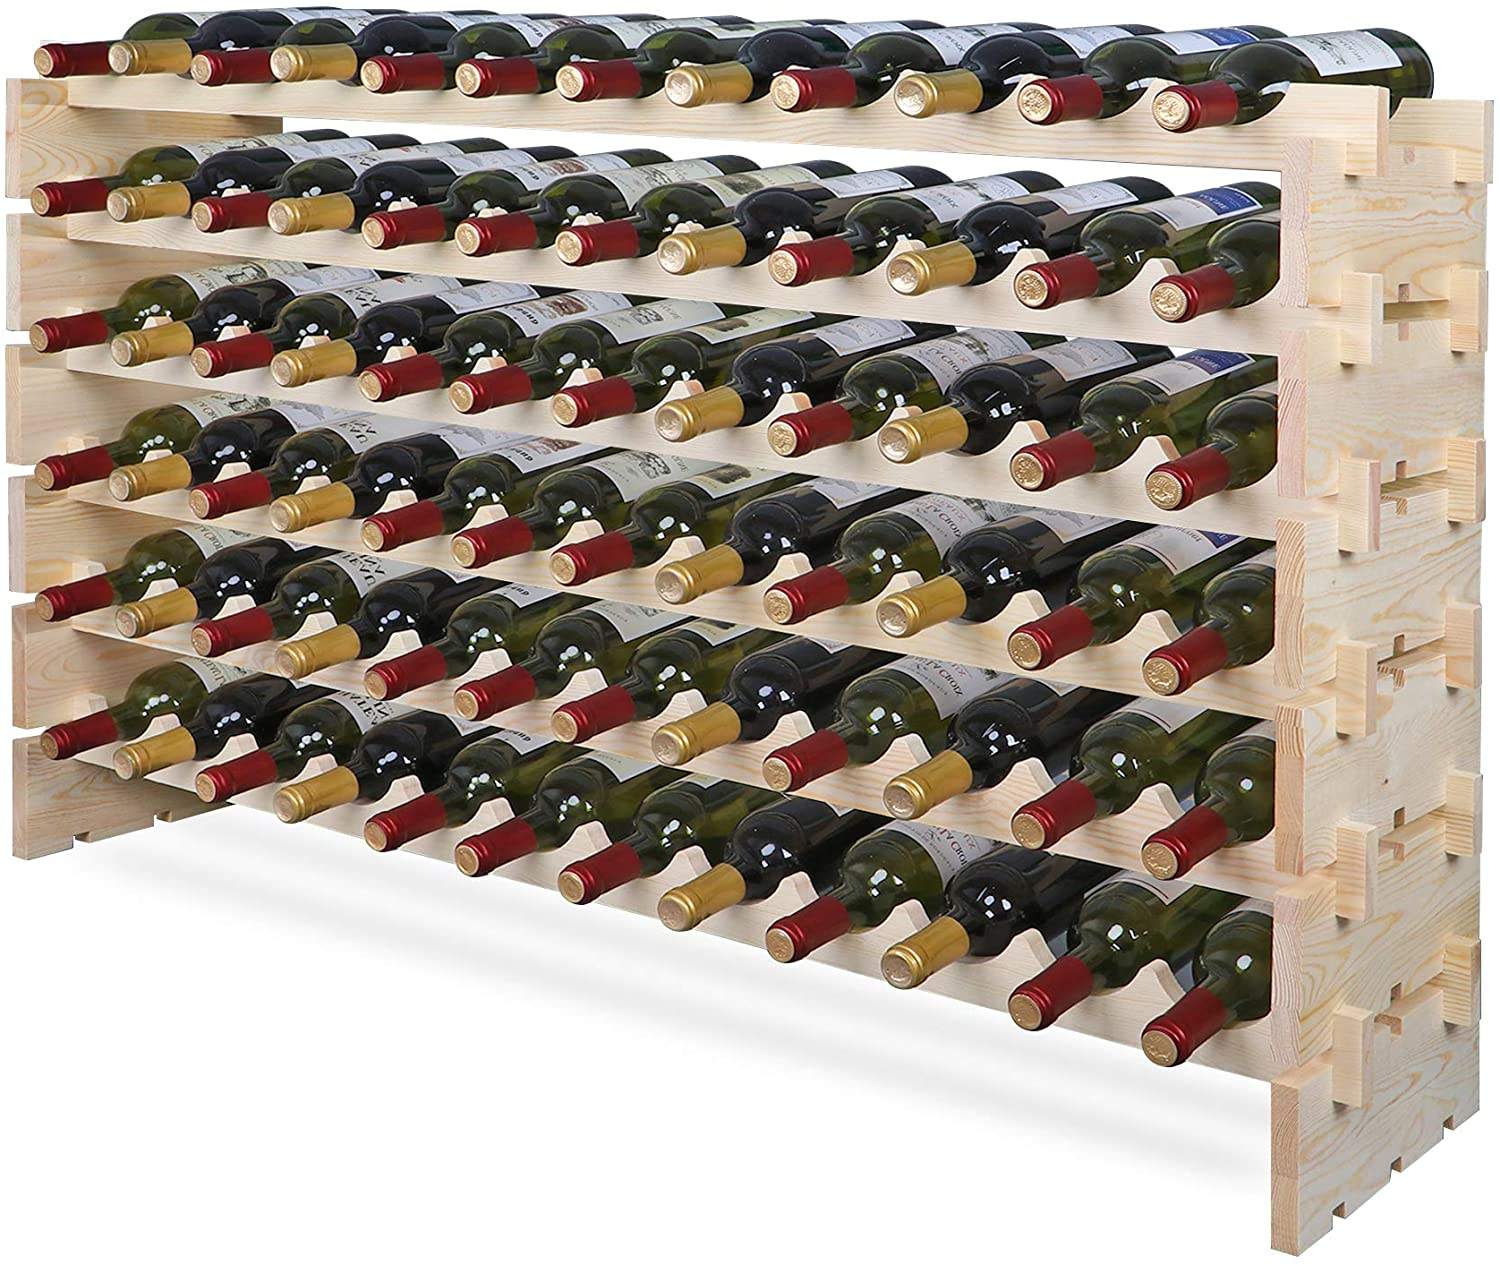 Minghou Introduces Customizable Modular Vintage Solid Wood Wine Cellar Cabinets: Modern Design, Tailored Solutions, and Exceptional Service